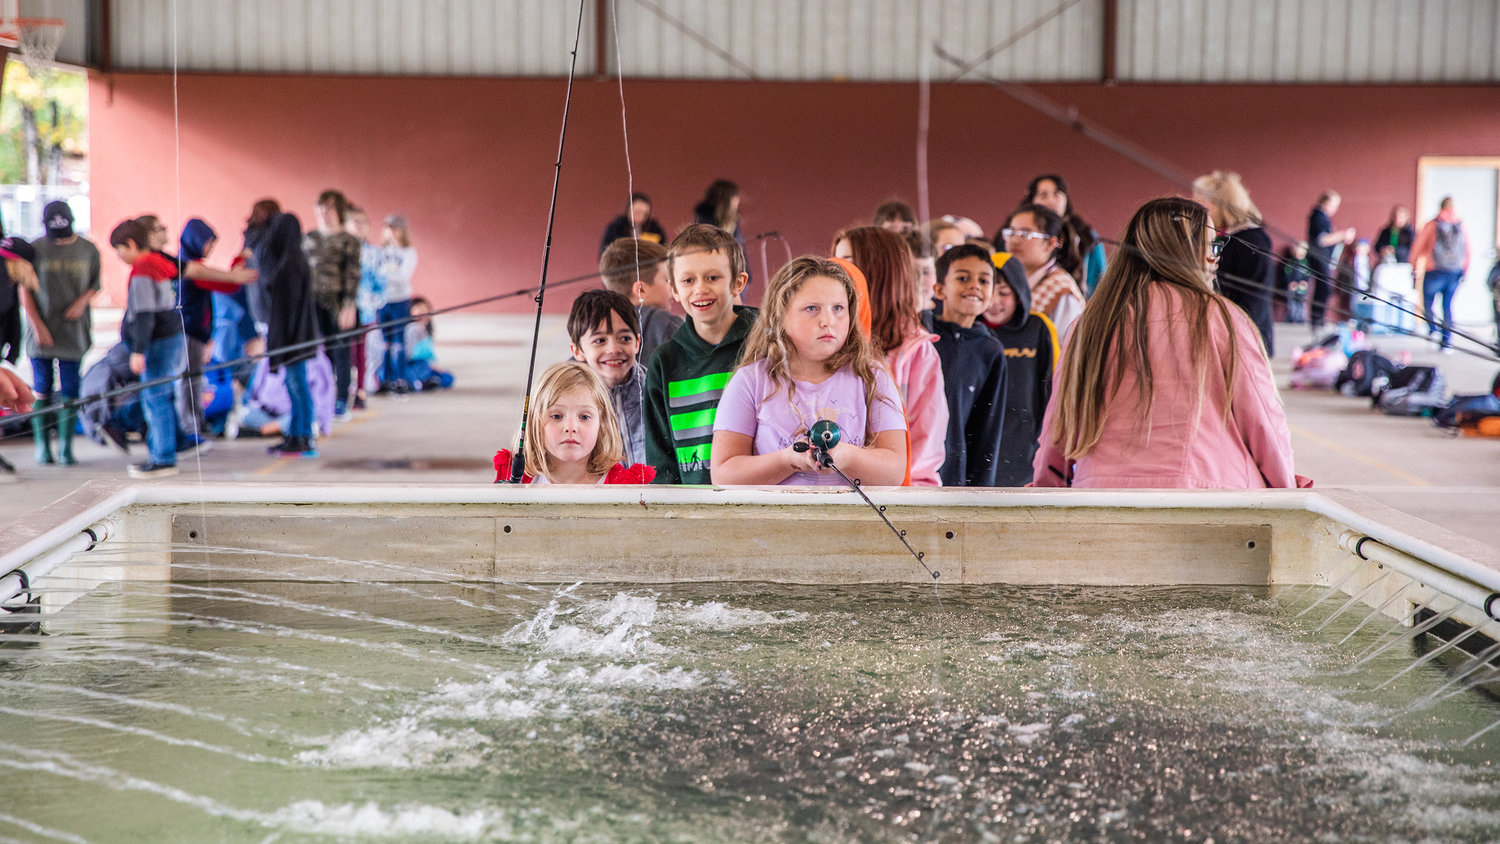 Students smile as they await their turn to fish for trout at Morton Elementary on Monday.